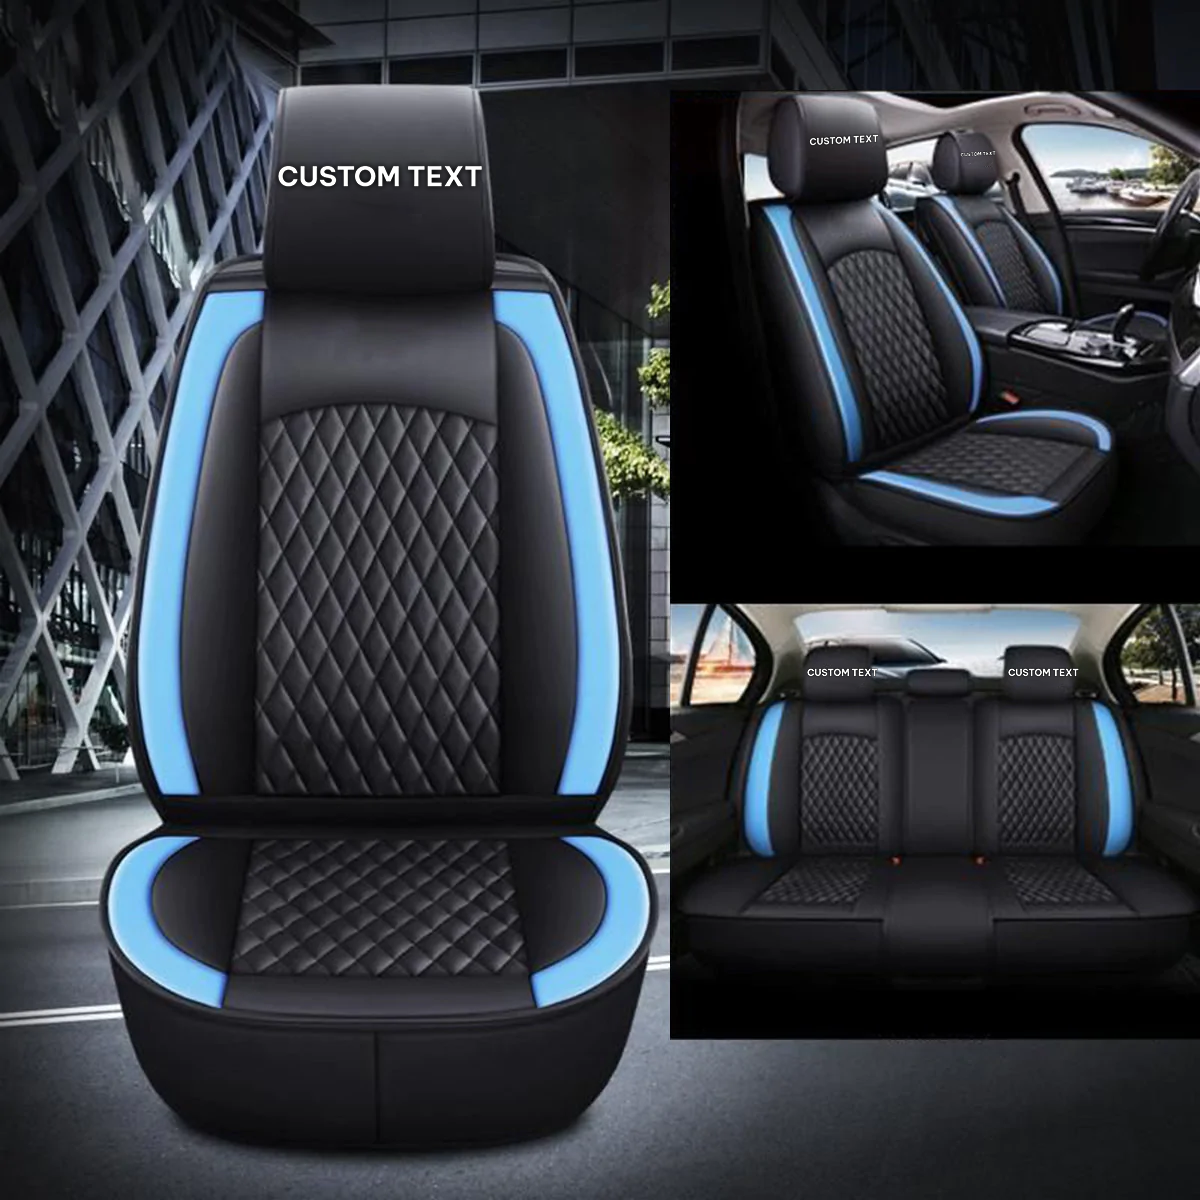 Custom Text For Seat Covers 5 Seats Full Set, Custom Fit For Your Cars, Leatherette Automotive Seat Cushion Protector Universal Fit, Vehicle Auto Interior Decor MT13988